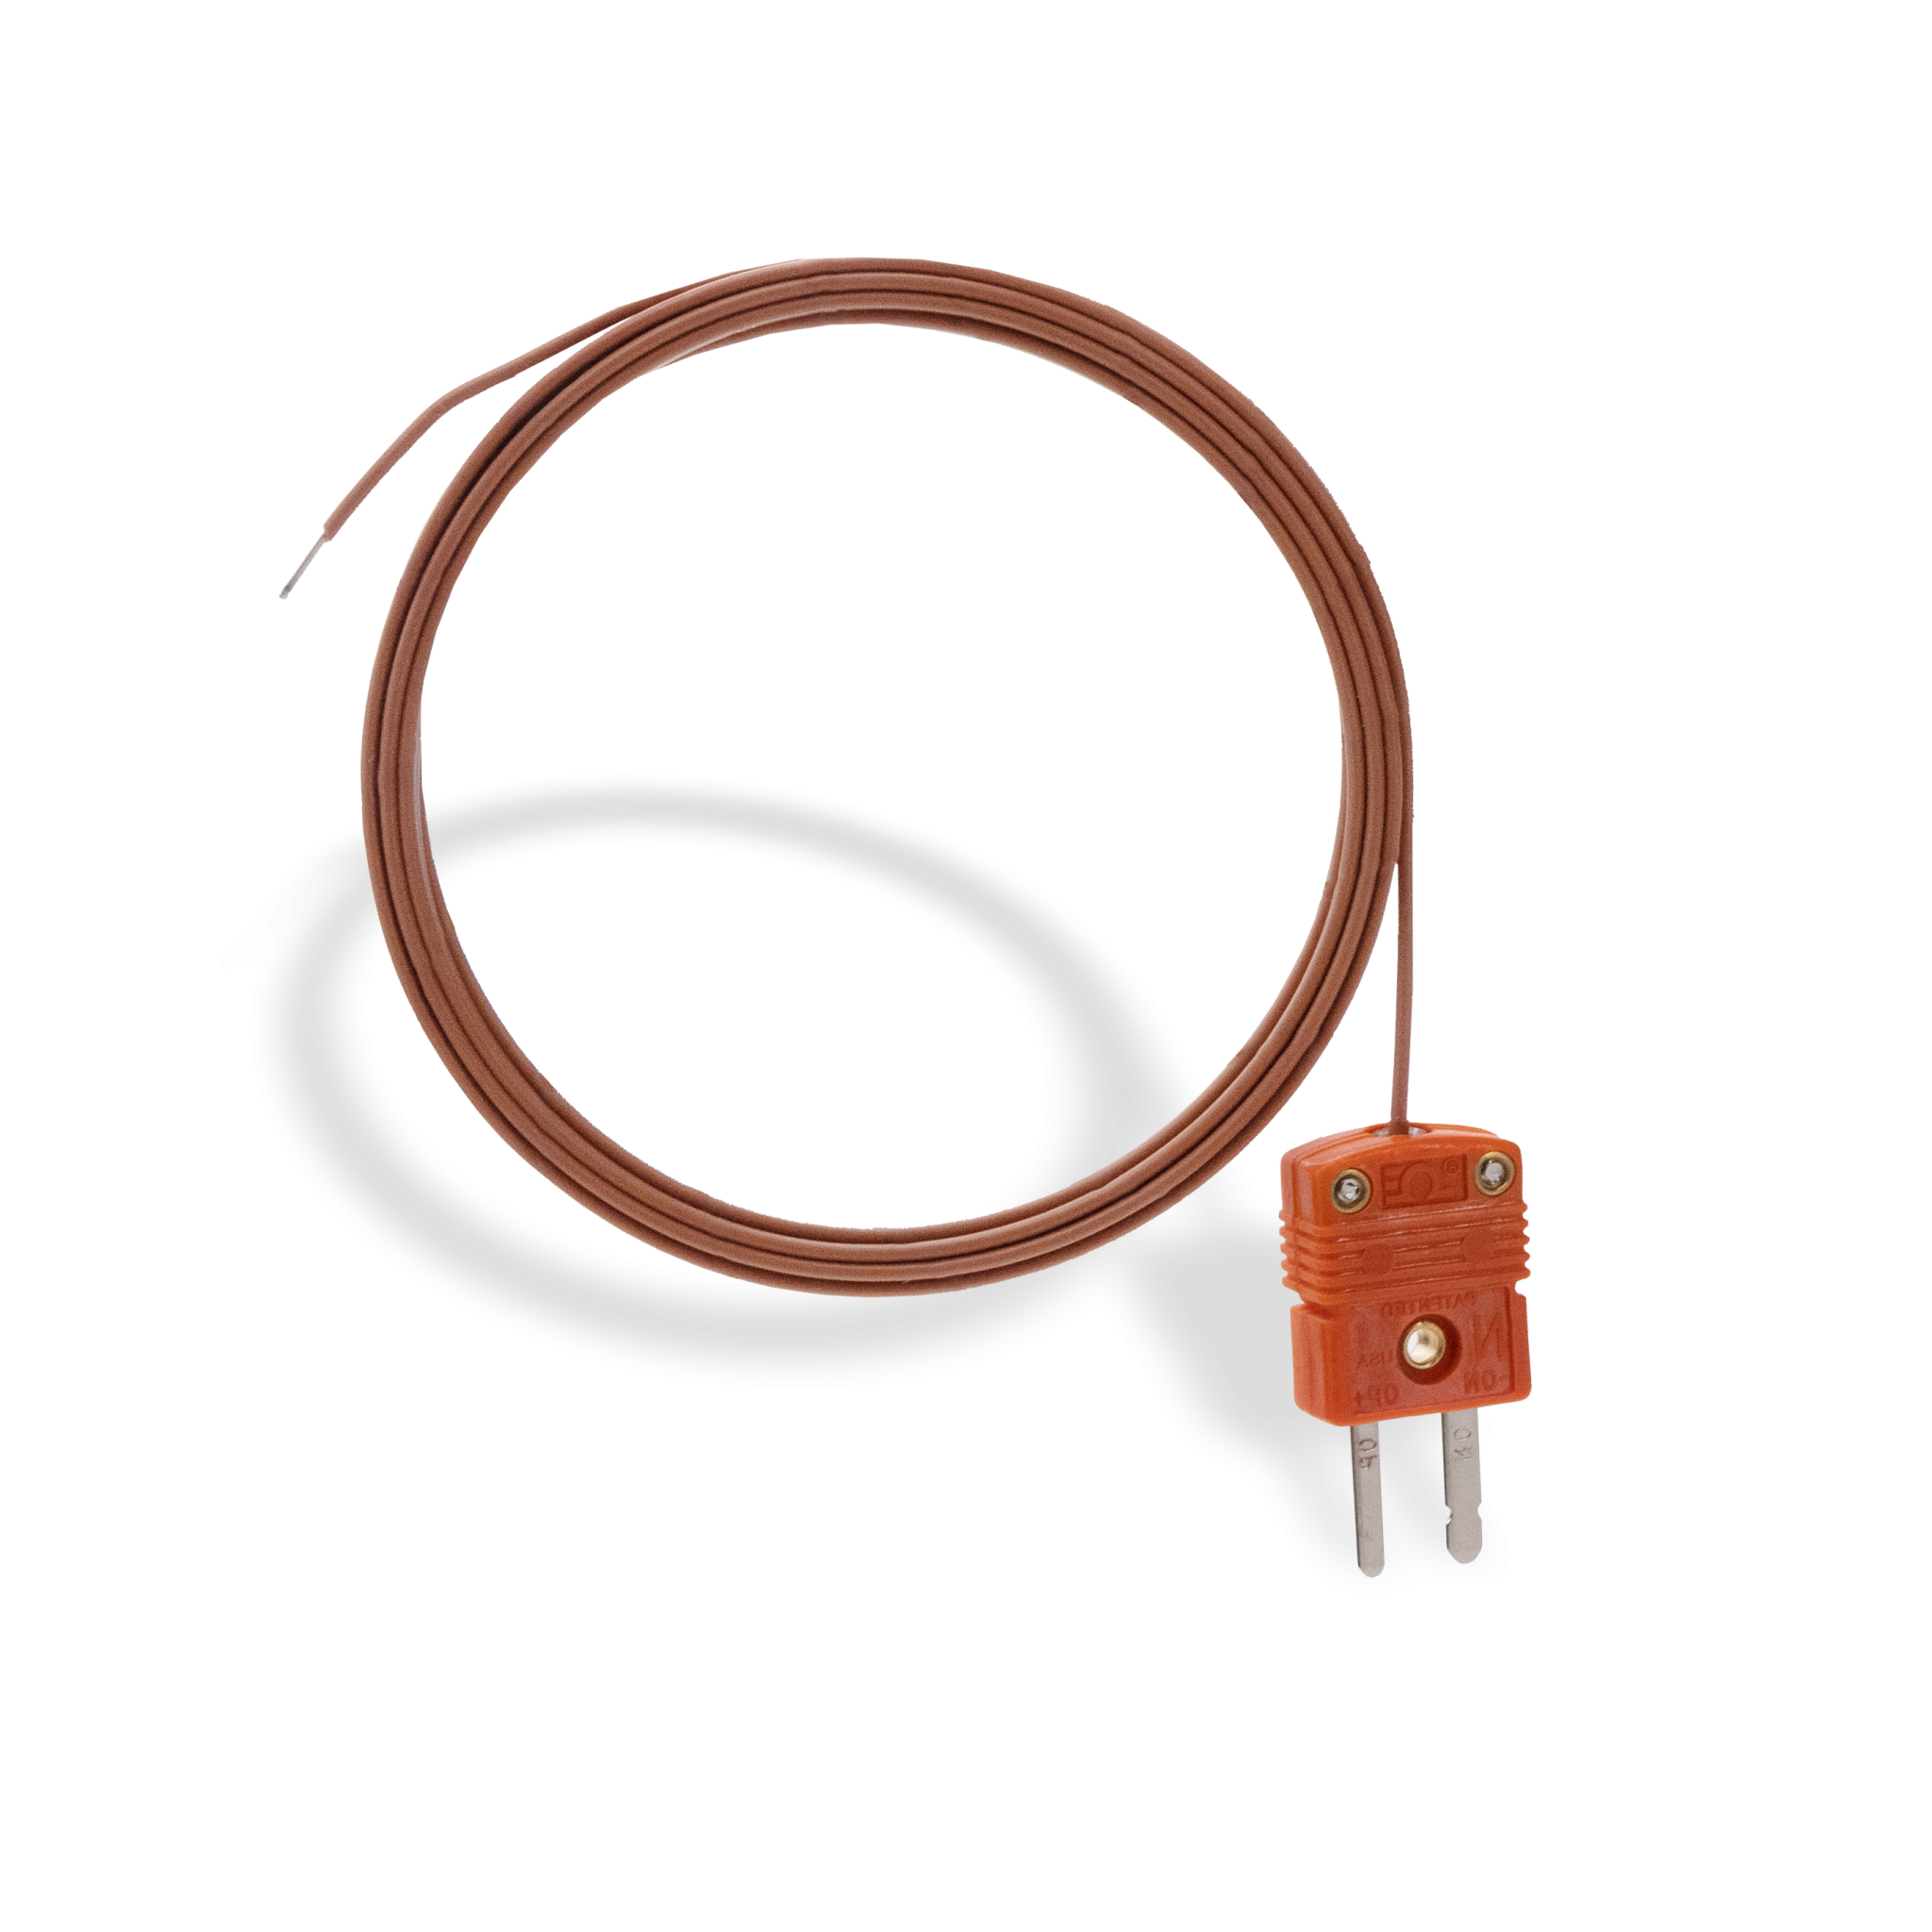 Type K, J, N, T and E thermocouple probe